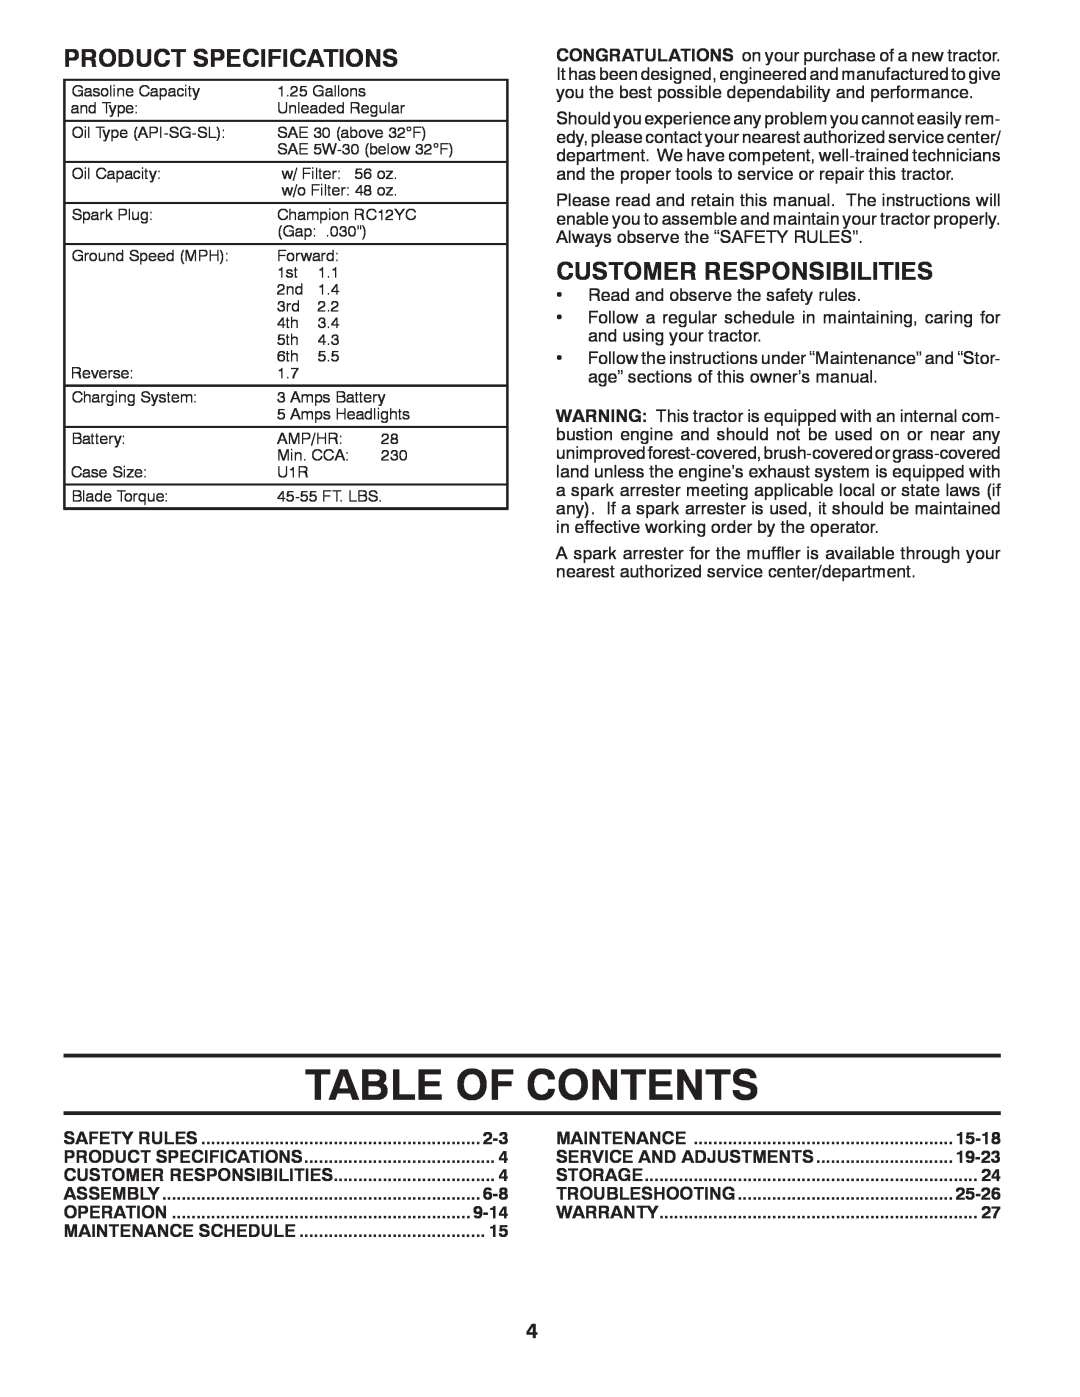 Poulan 96012006904 manual Table Of Contents, Product Specifications, Customer Responsibilities 